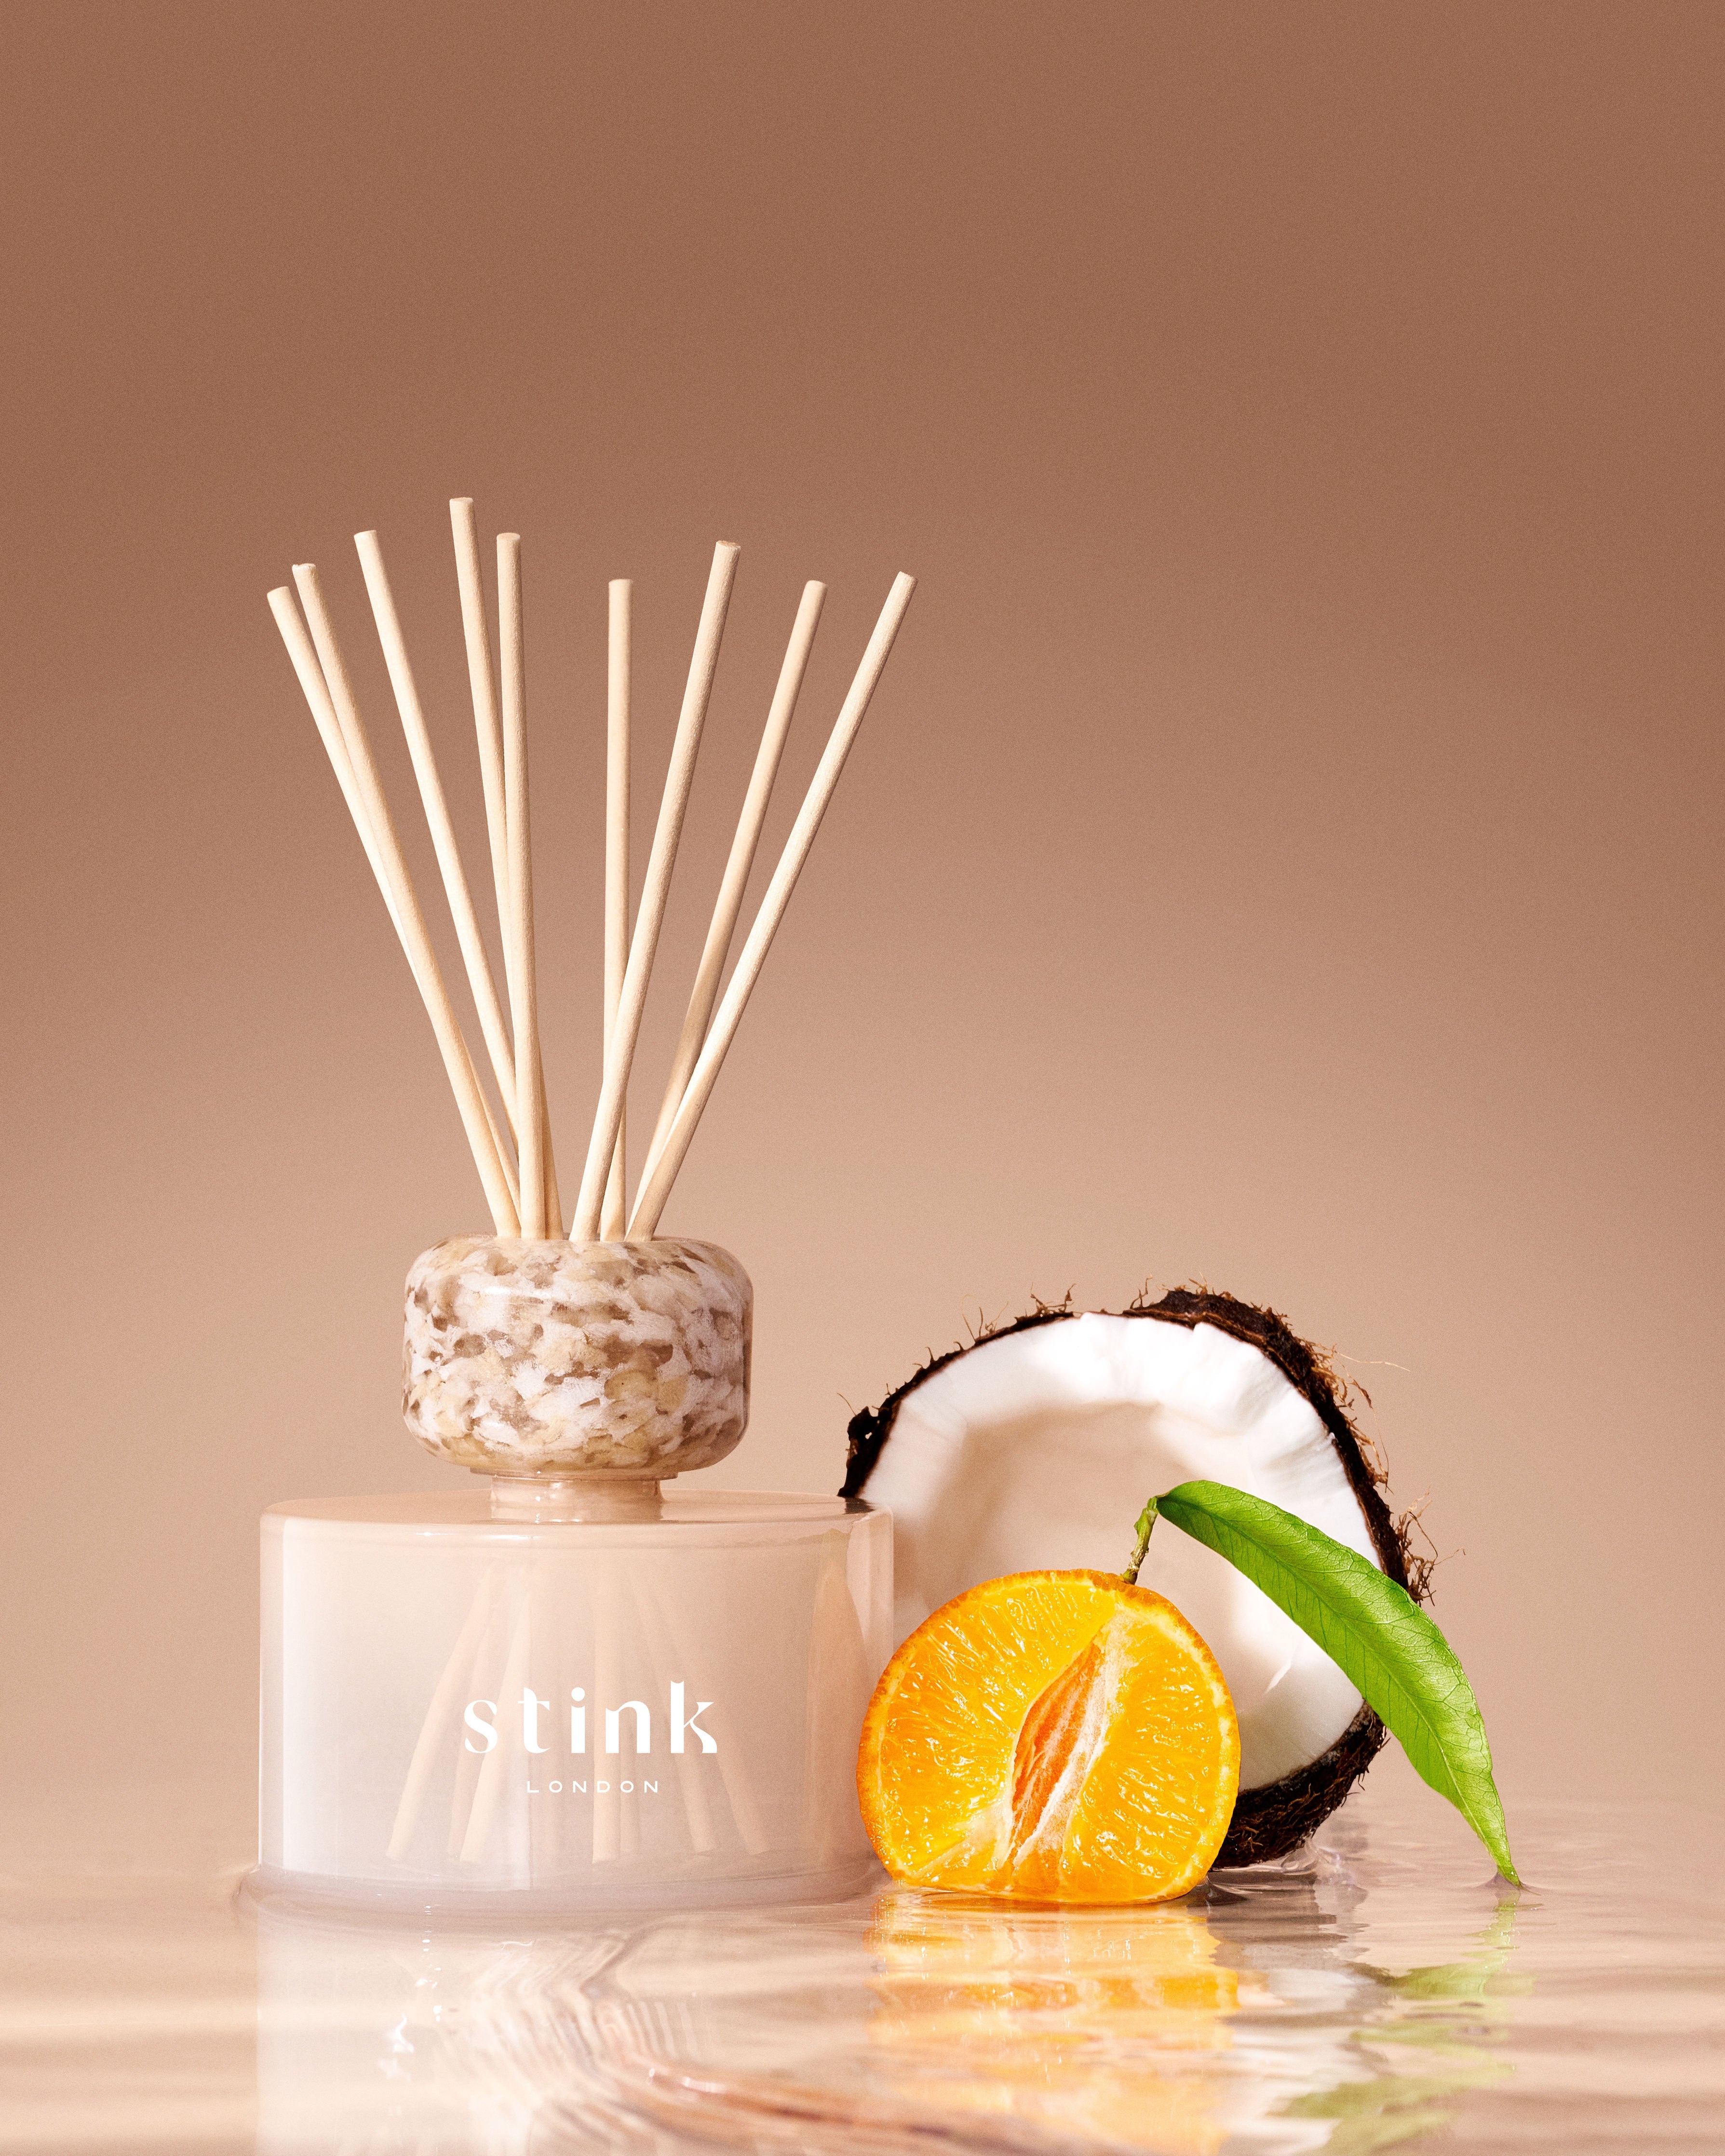 The Reed Diffuser: Work The Room